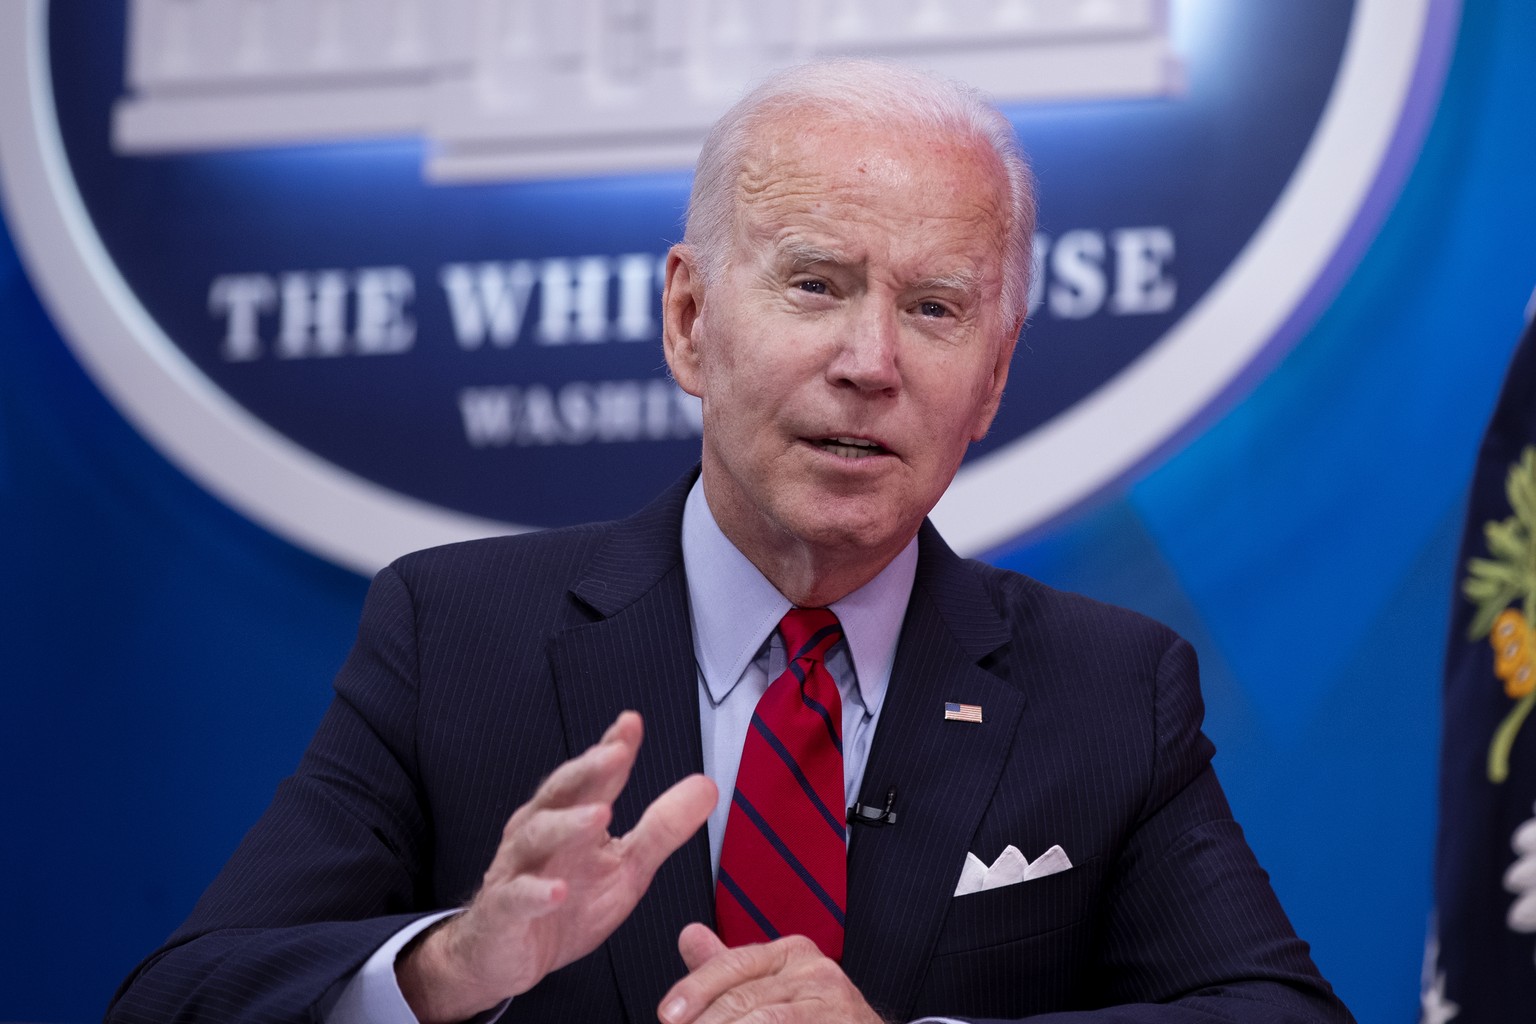 epa10046751 US President Joe Biden speaks during a virtual meeting with Governors to discuss efforts to protect access to reproductive health care, in the Eisenhower Executive Office Building on the W ...